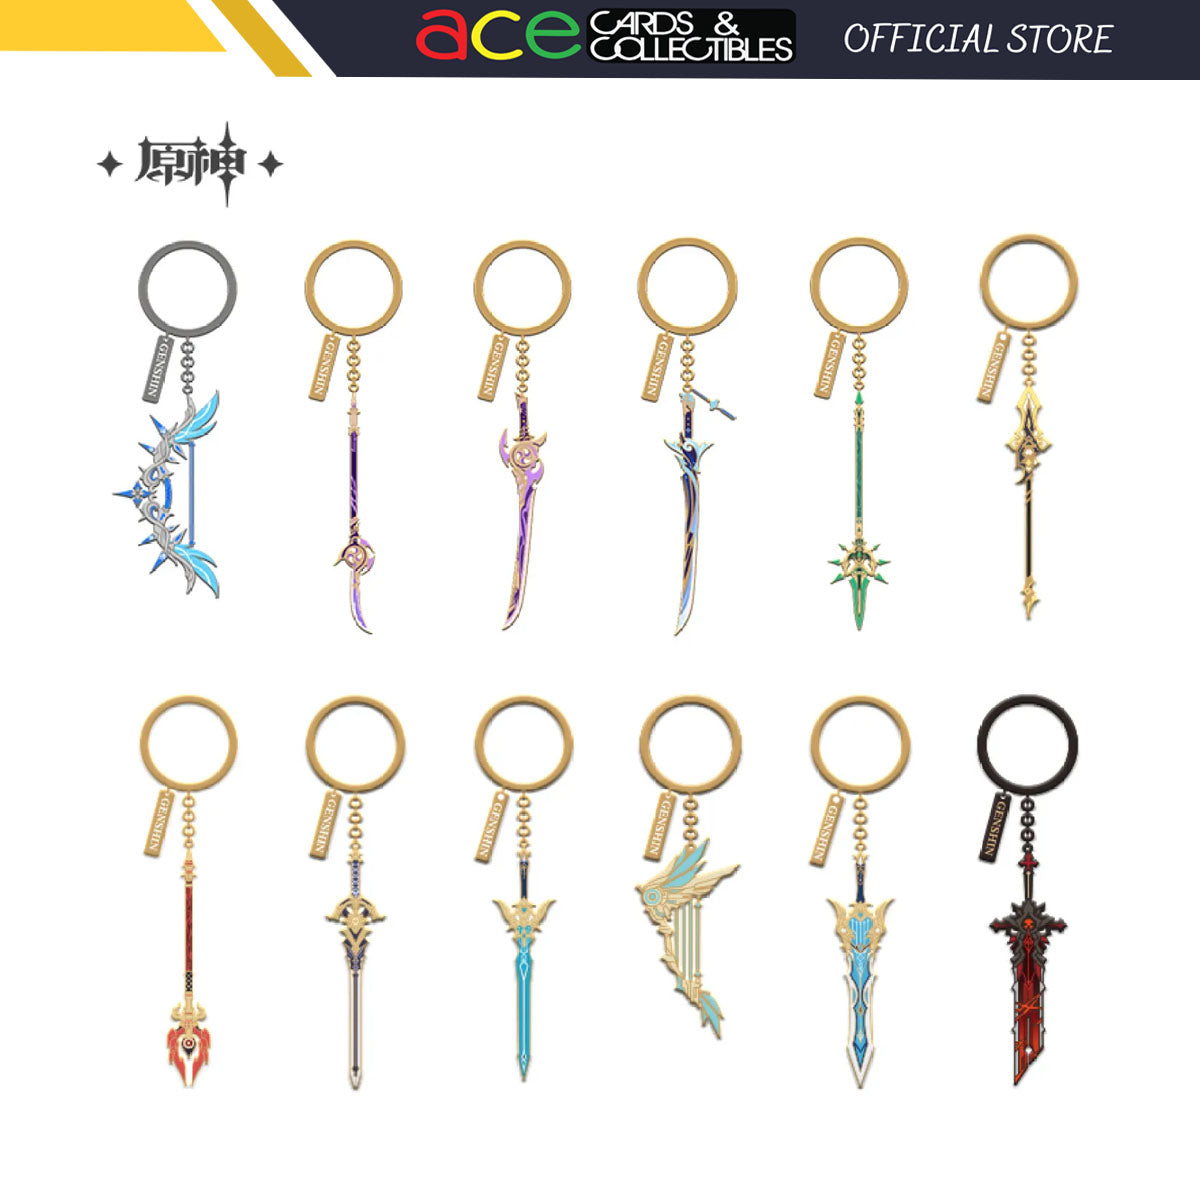 miHoYo -Genshin Impact- Weapon Metal Charm Collection-Freedom-Sworn-miHoYo-Ace Cards &amp; Collectibles